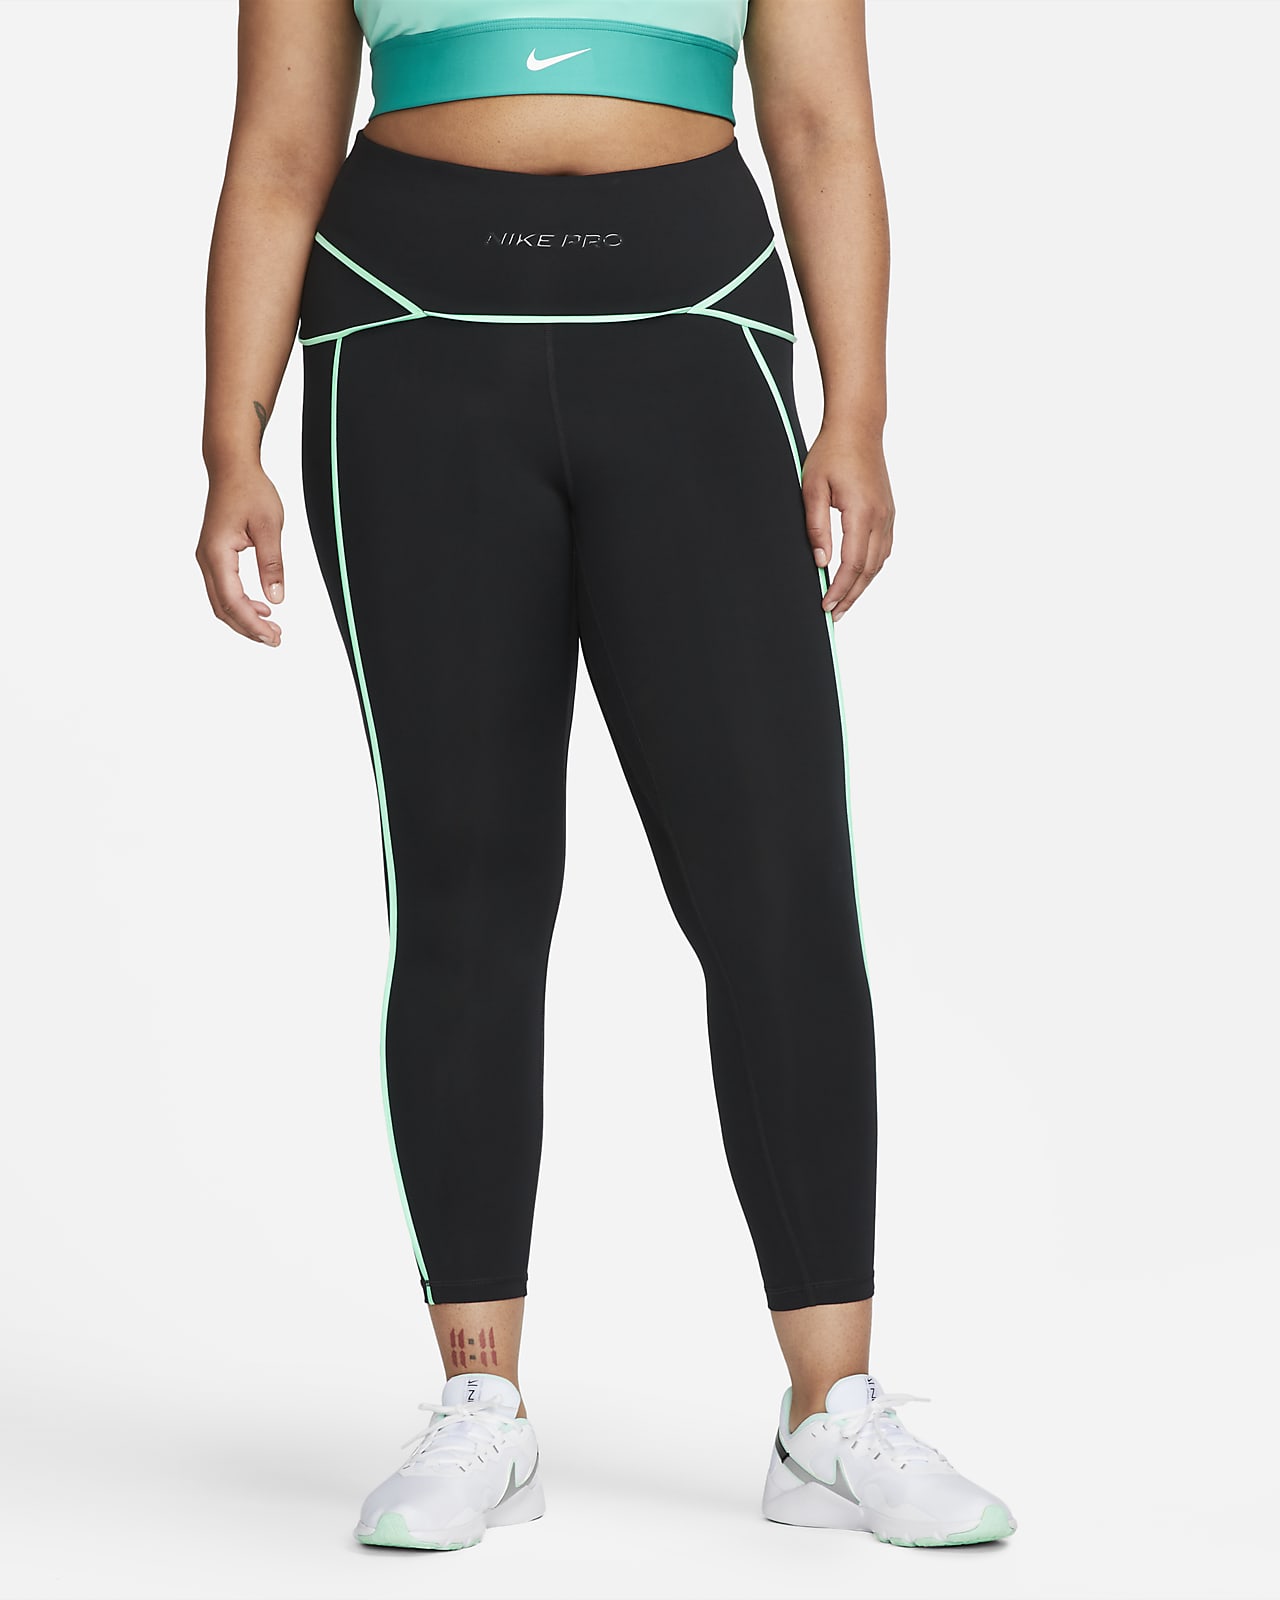 Pro High Waist Training Tights by Nike